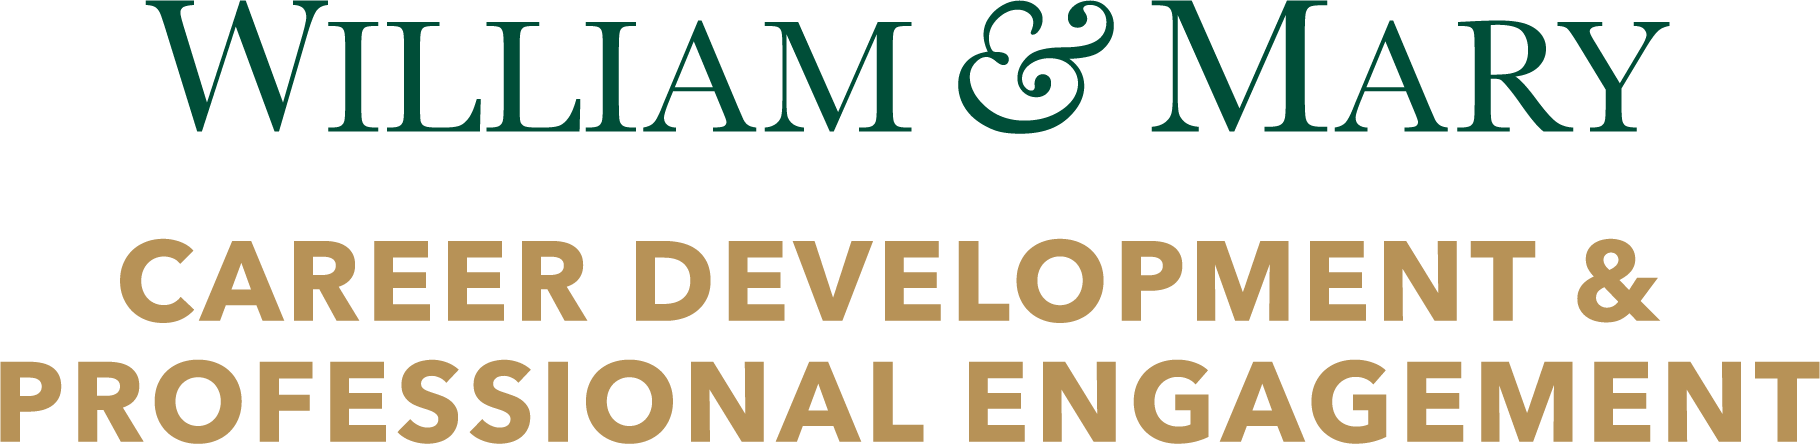 office-of-career-development--professional-engagement-logo.png